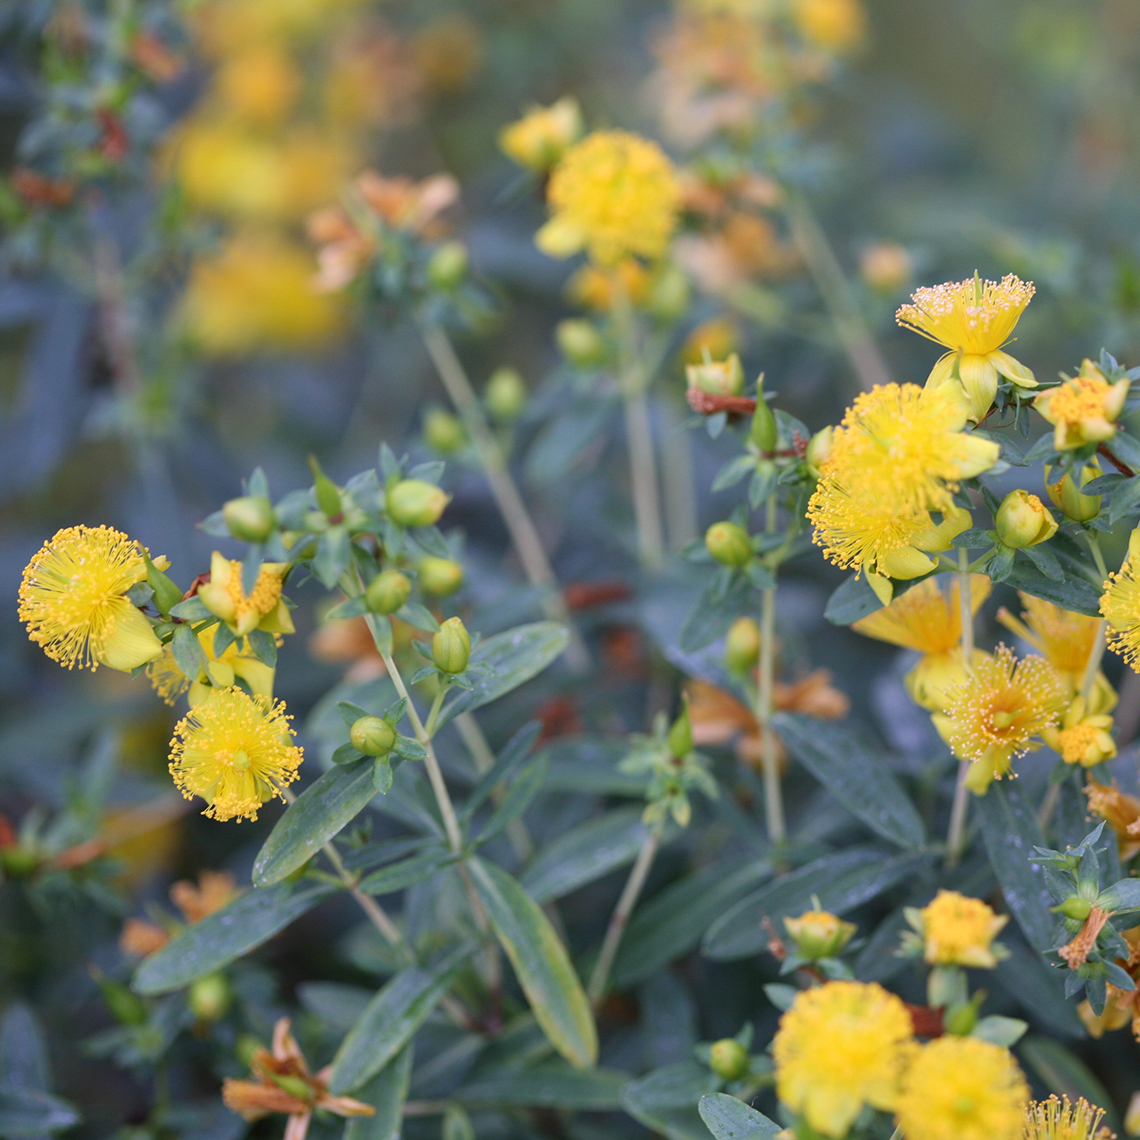 Closeup of the yellow puffball flowers of Blues Festival hypericum contrasting with the narrow blue leaves